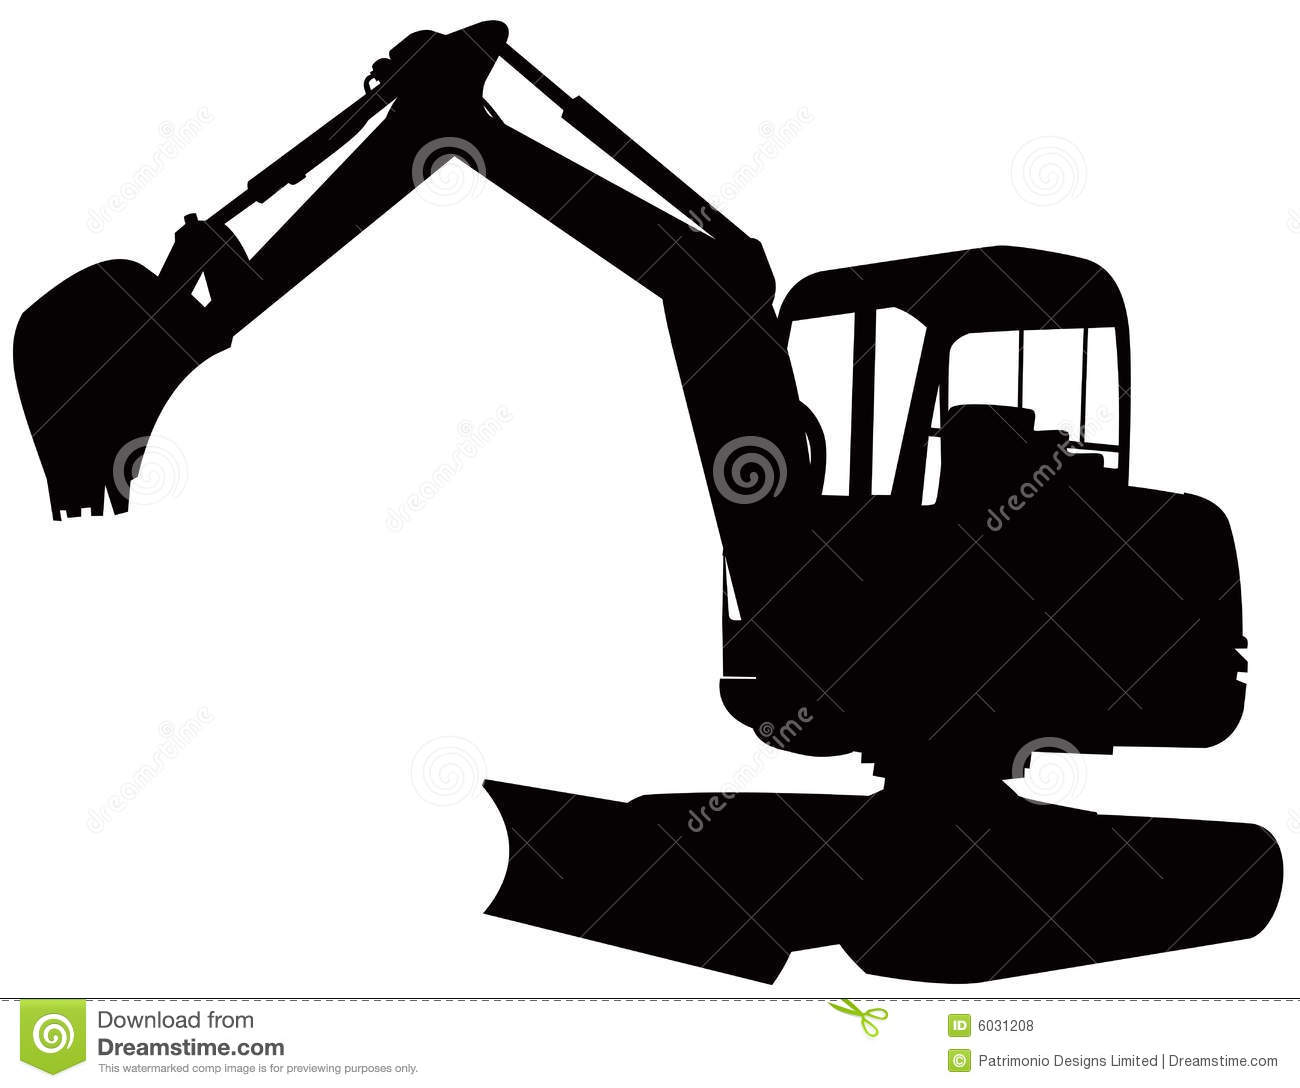 There Is 52 Clip Art Of Digger Machine Free Cliparts All Used For Free